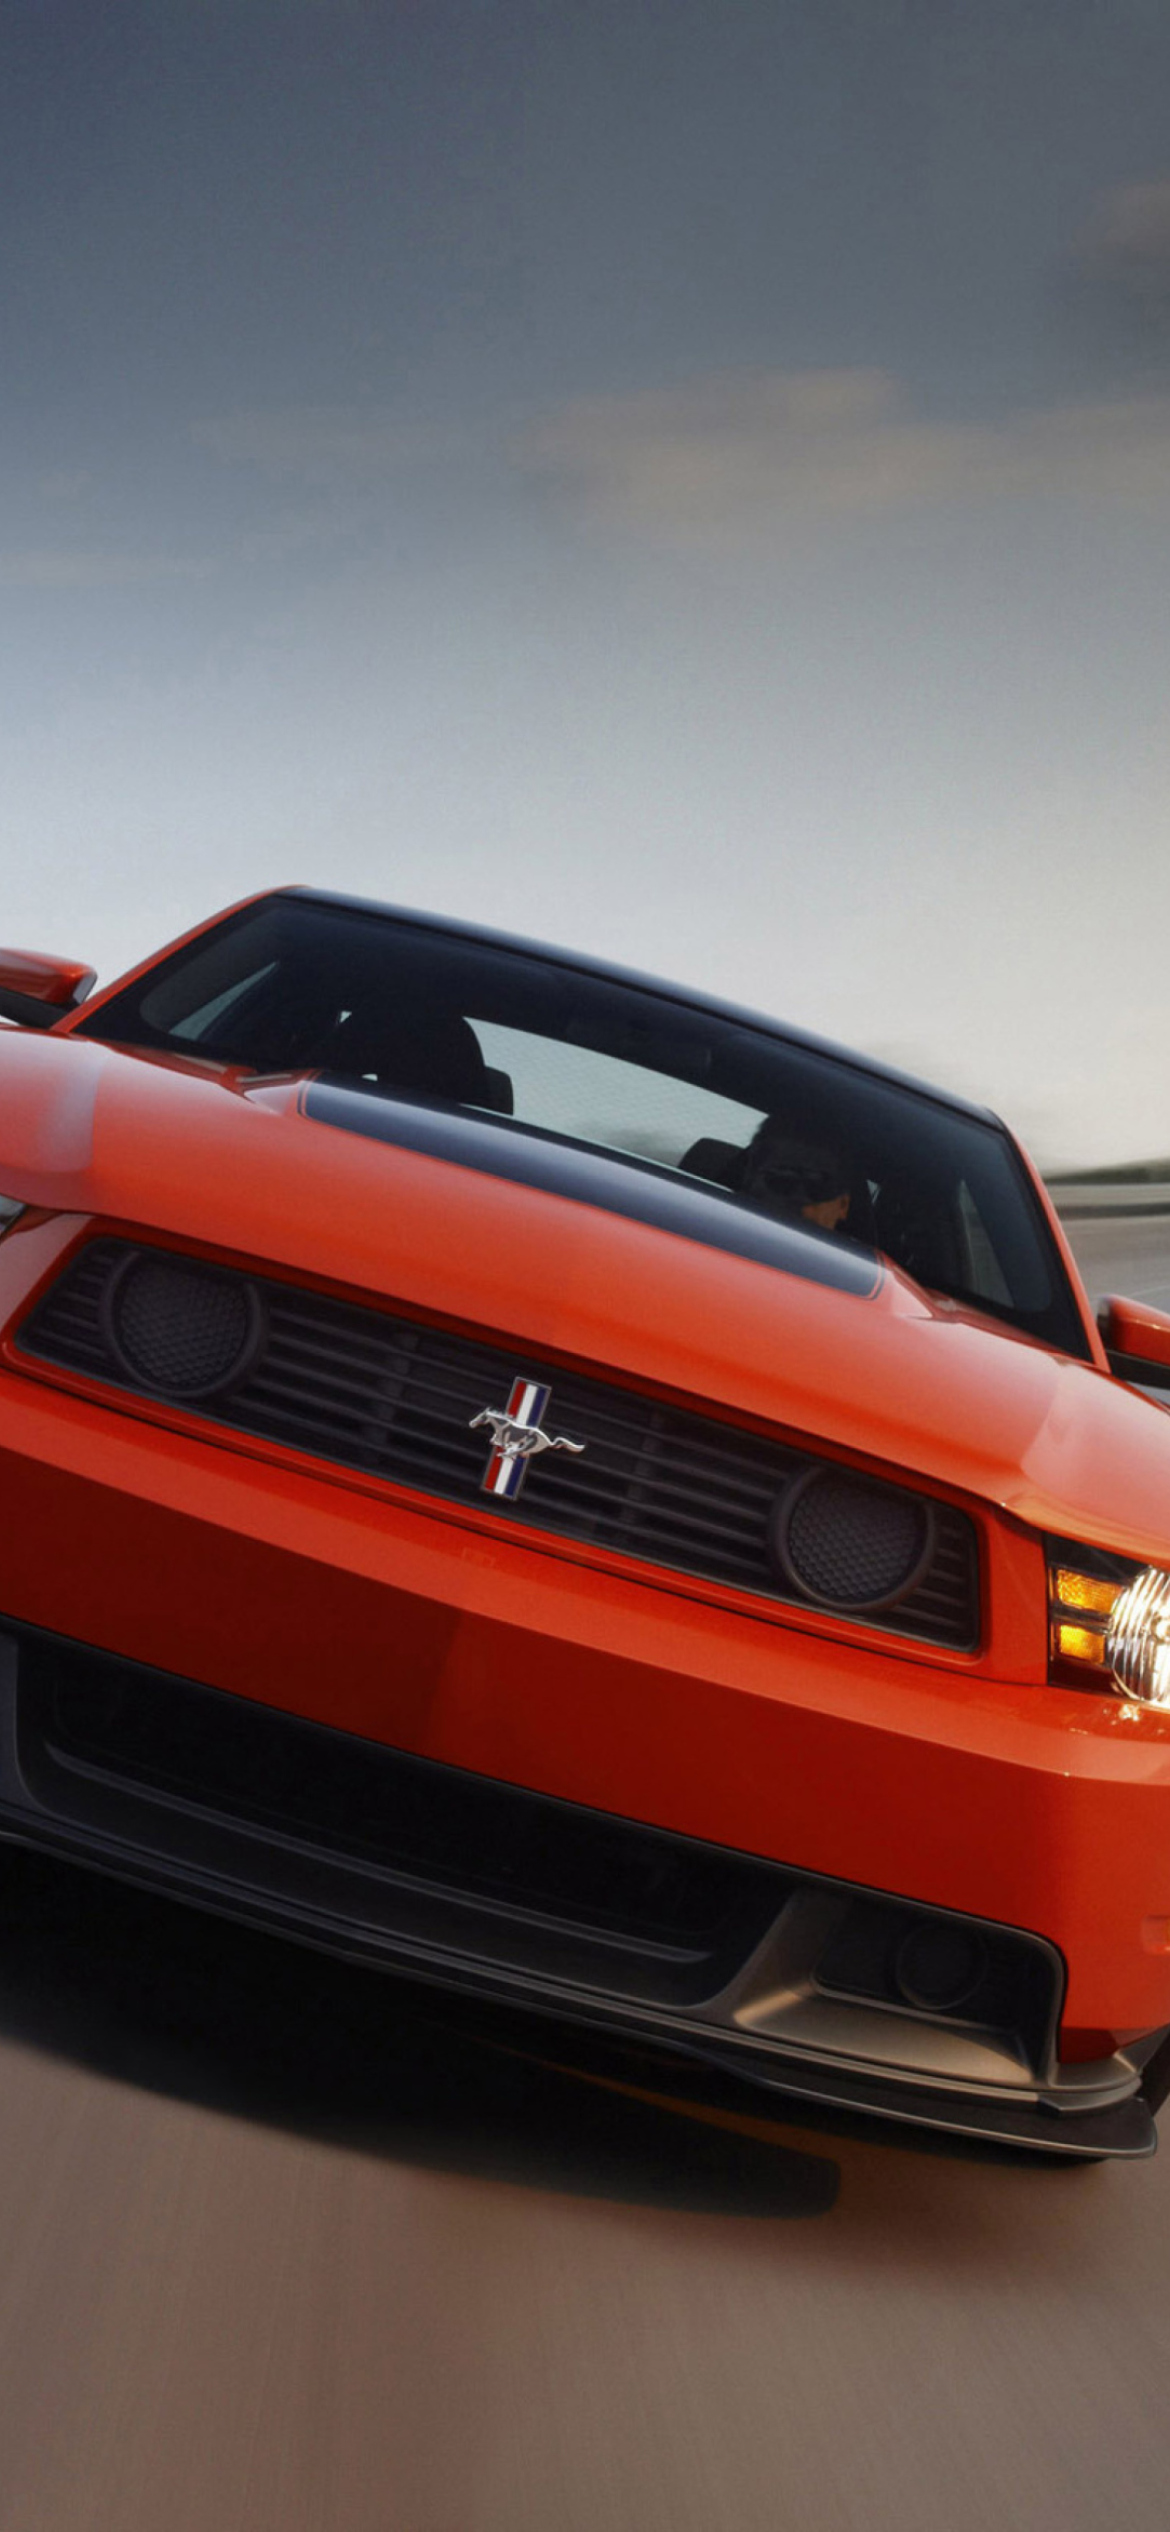 Das Red Cars Ford Mustang Wallpaper 1170x2532